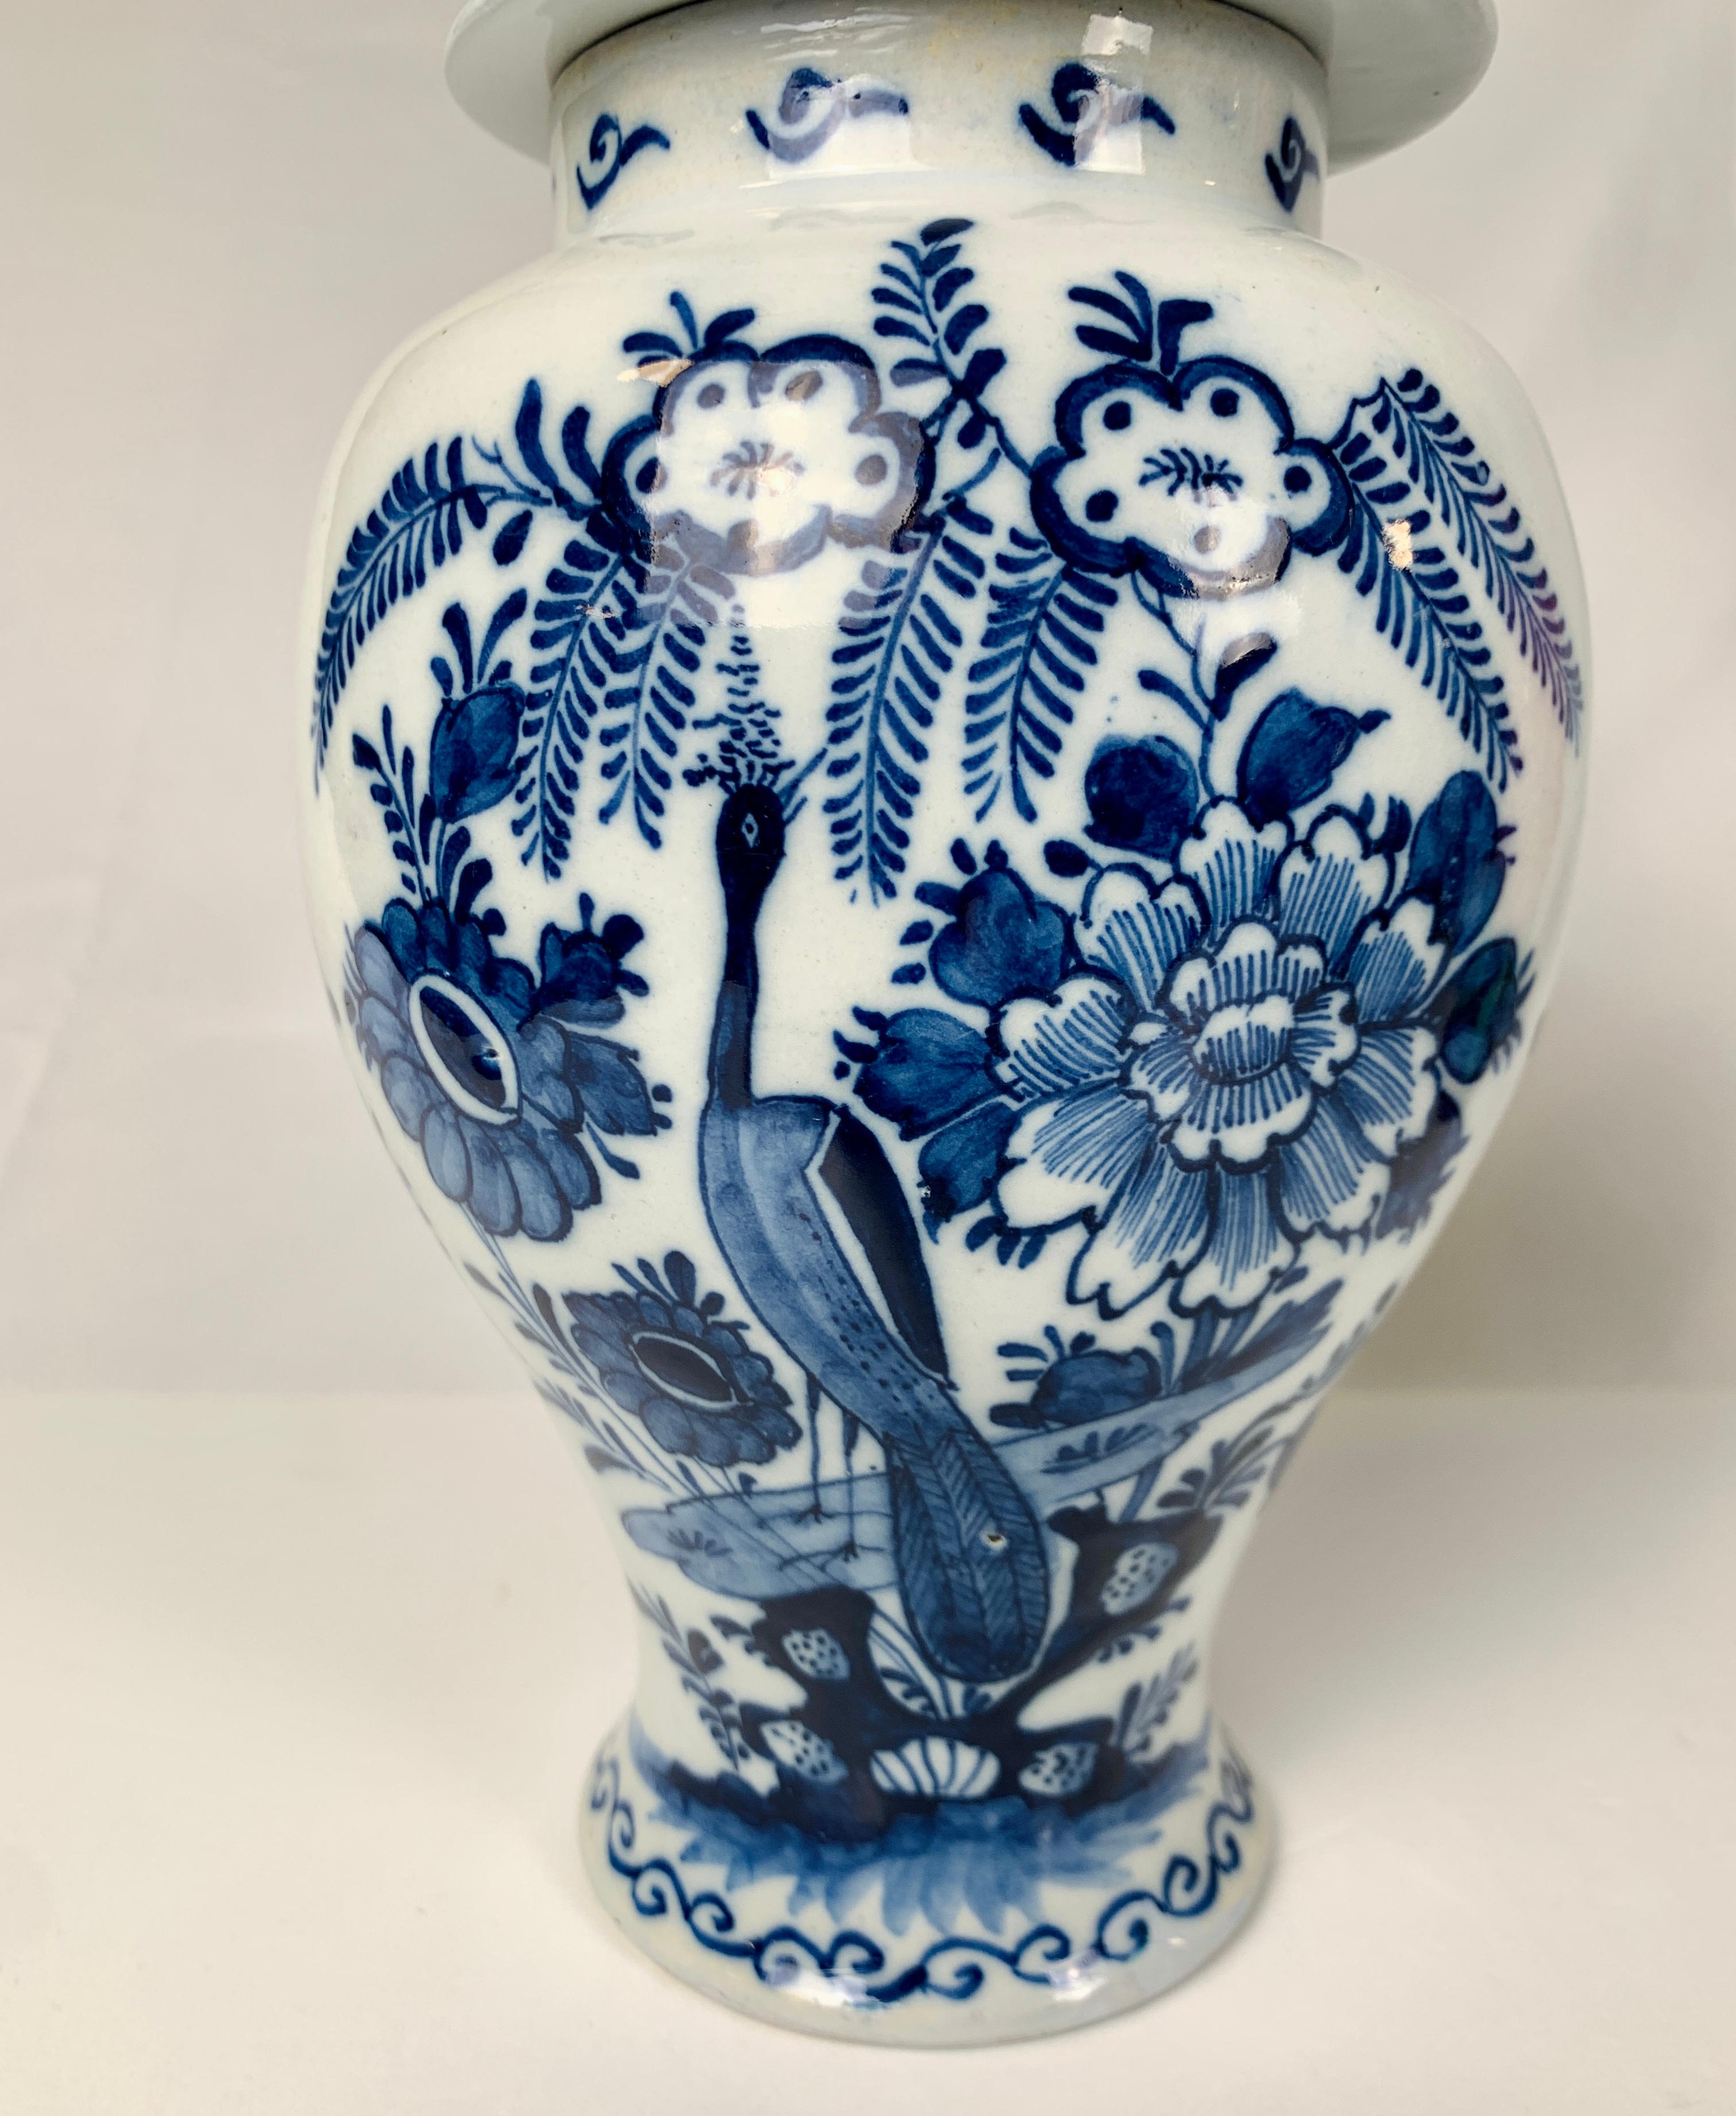 A blue and white Dutch Delft jar hand-painted in cobalt blue showing a peacock in a flower-filled garden.
The scene is inspired by Chinese porcelains of the 17th and 18th centuries.
The matching cover is decorated with flowers, ferns, and